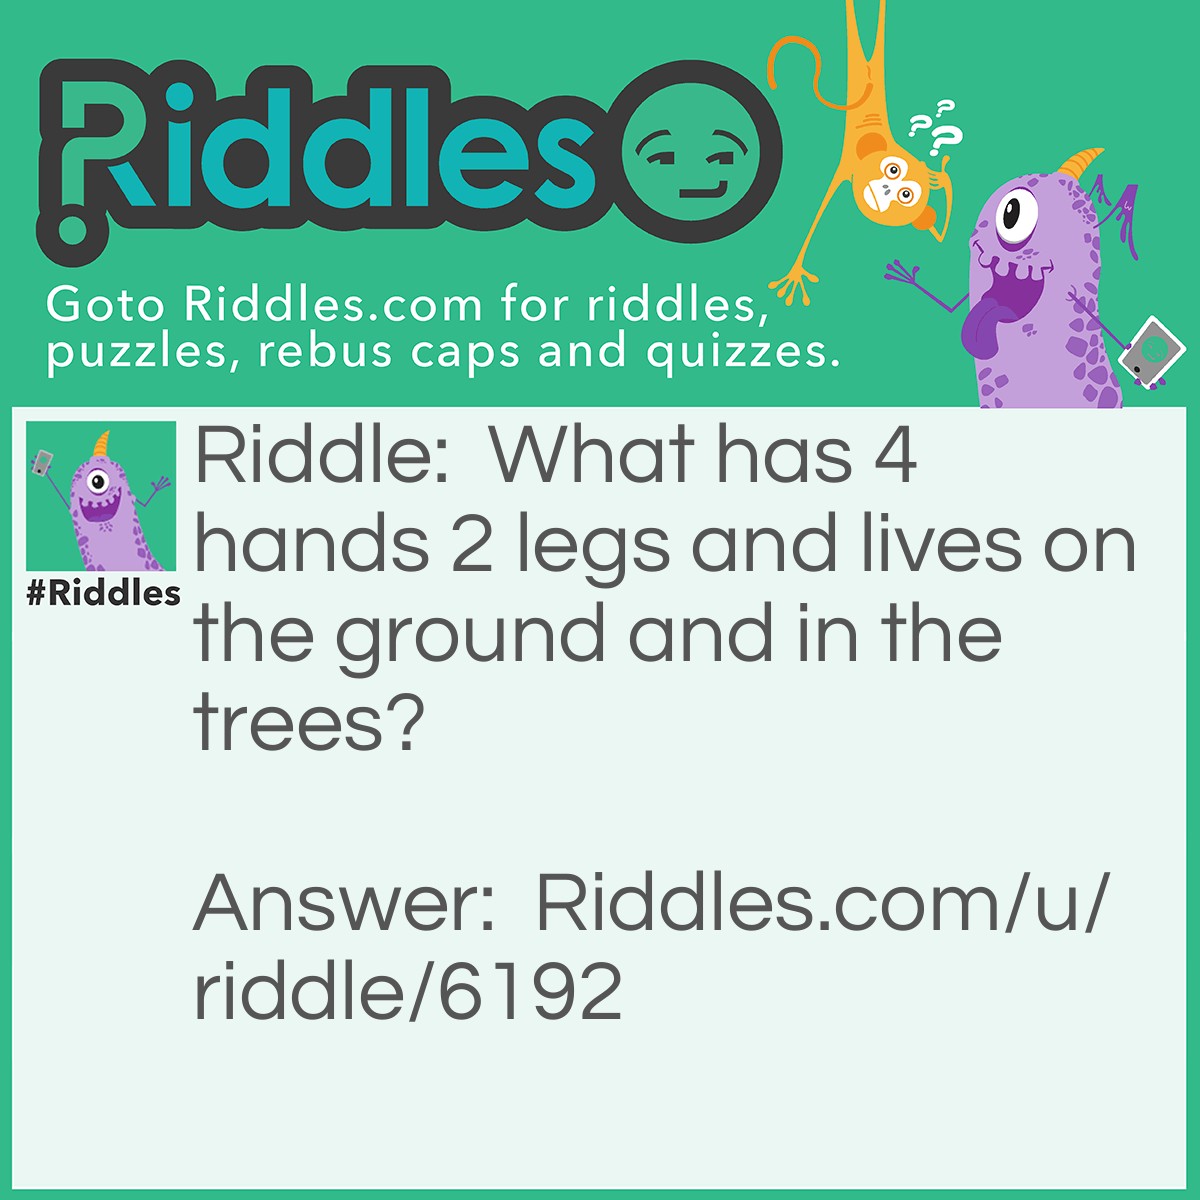 Riddle: What has 4 hands 2 legs and lives on the ground and in the trees? Answer: Monkey.